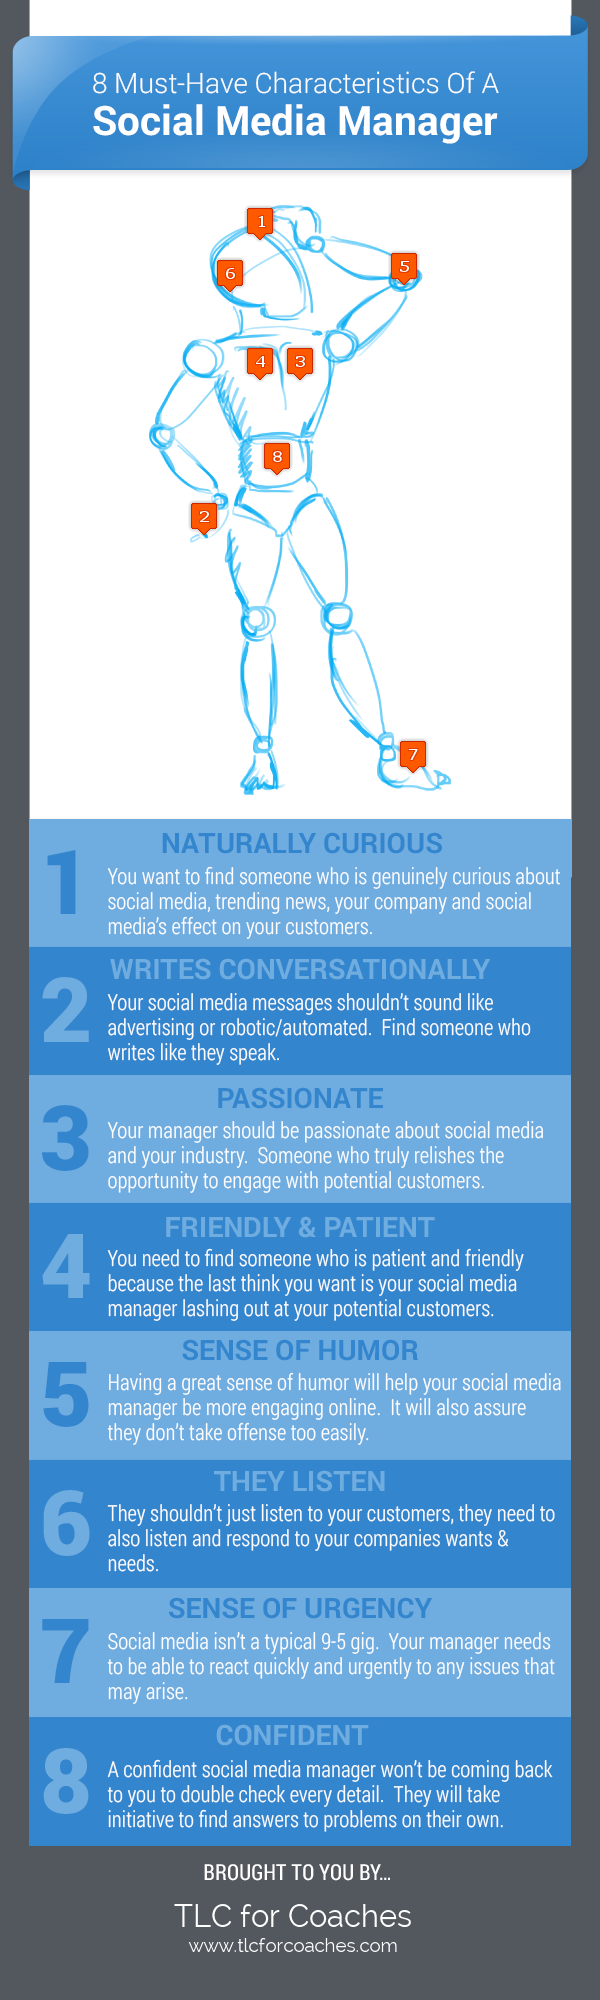 8 Must Have Charactaristics of a Social Media Manager